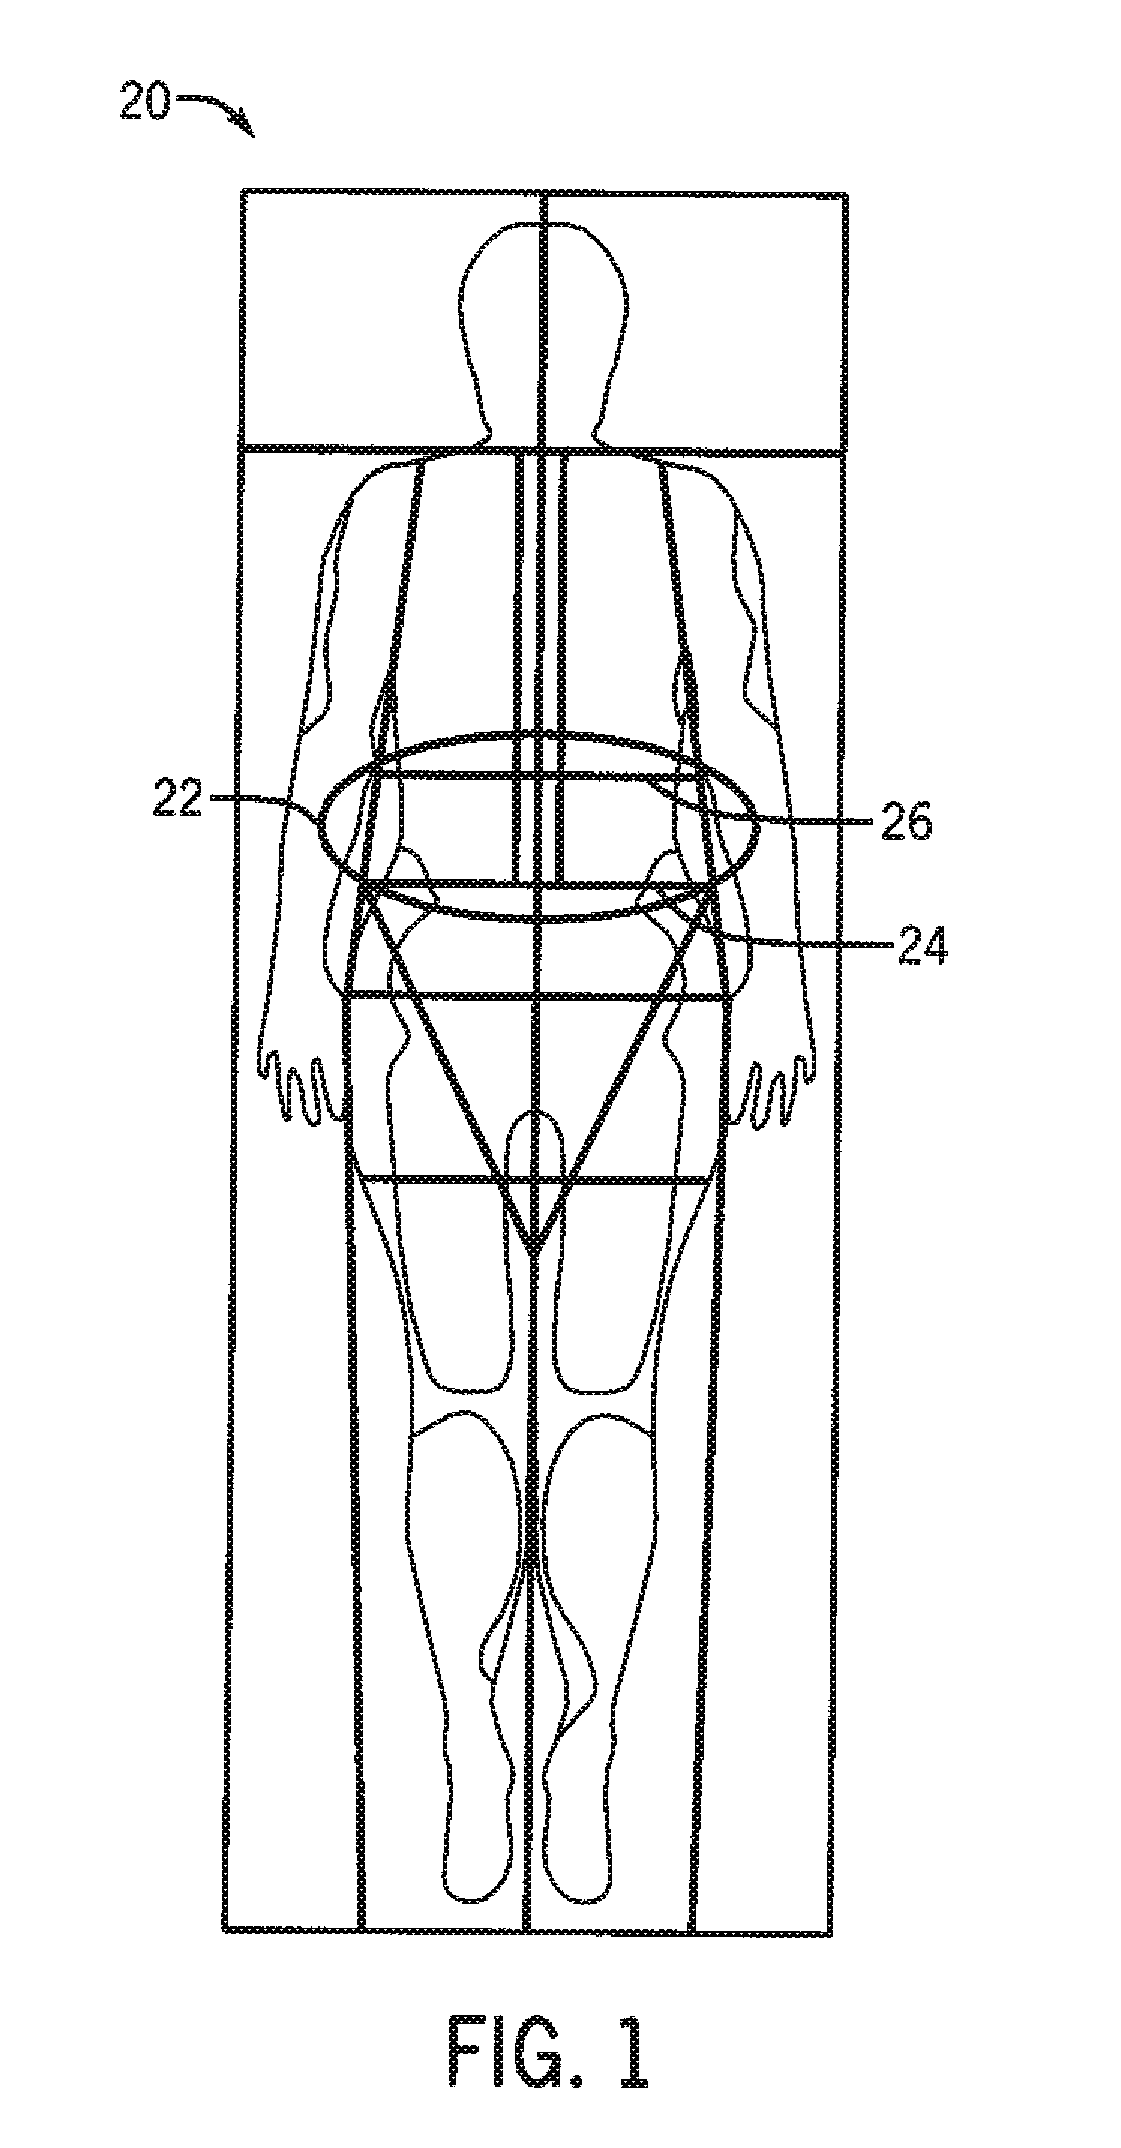 Method and system for measuring visceral fat mass using dual energy x-ray absorptiometry